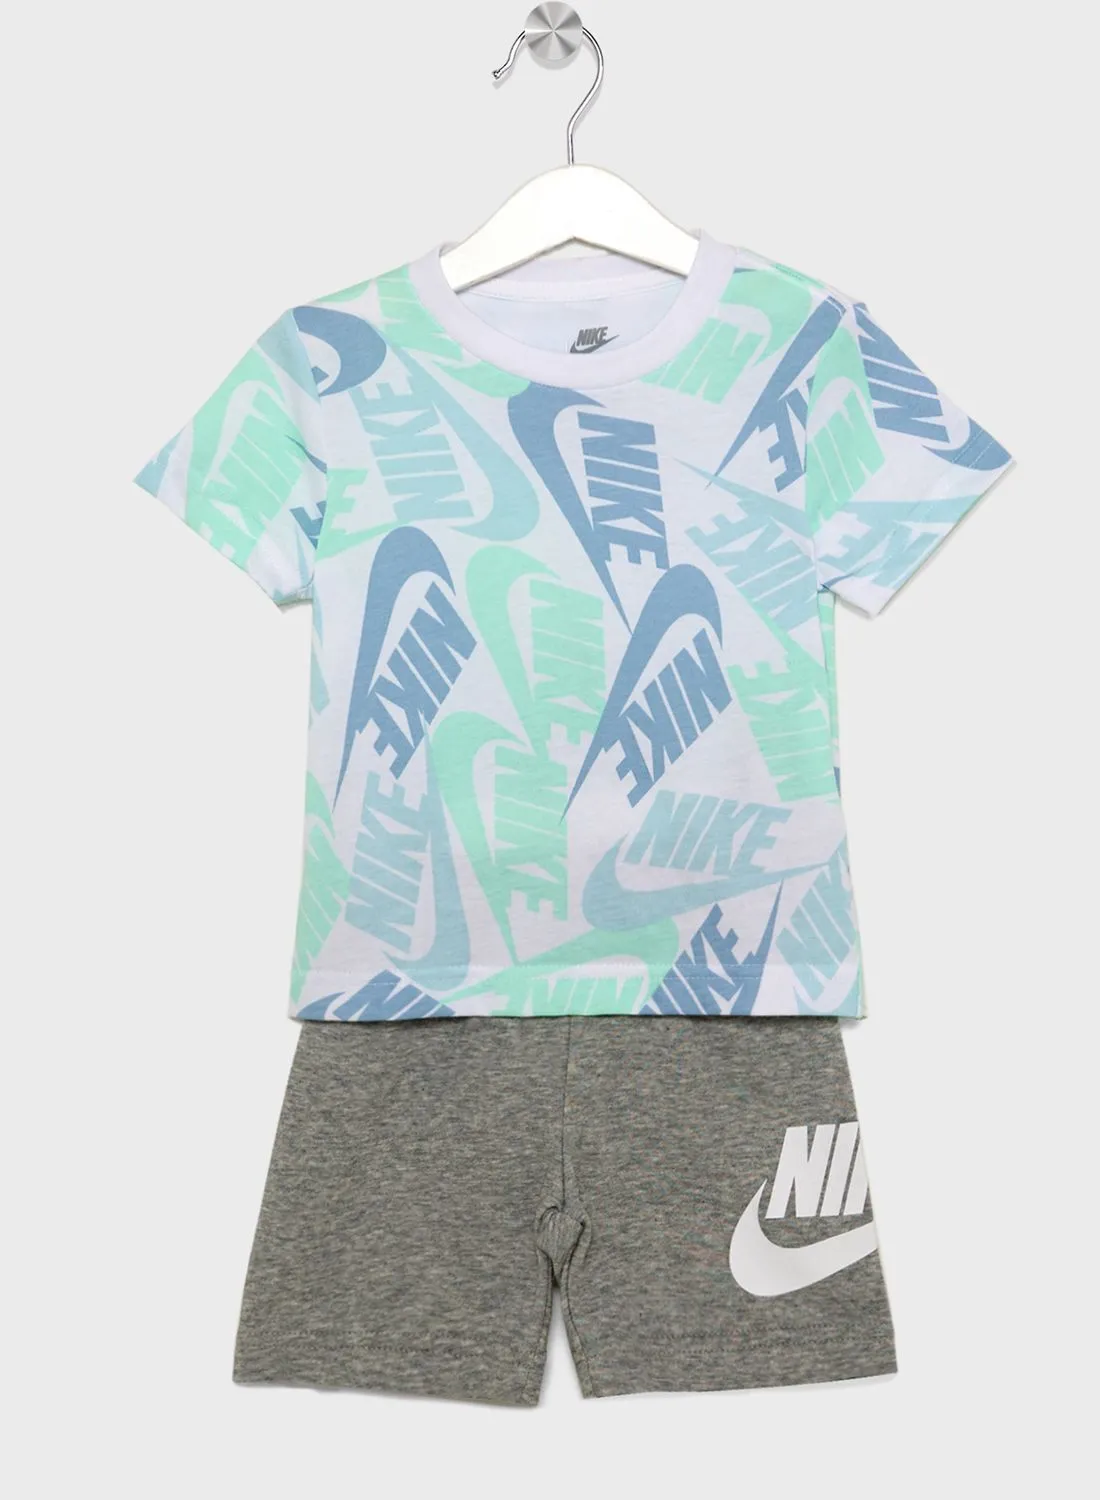 Nike Infant 2 Piece All Over Printed T-Shirt Set